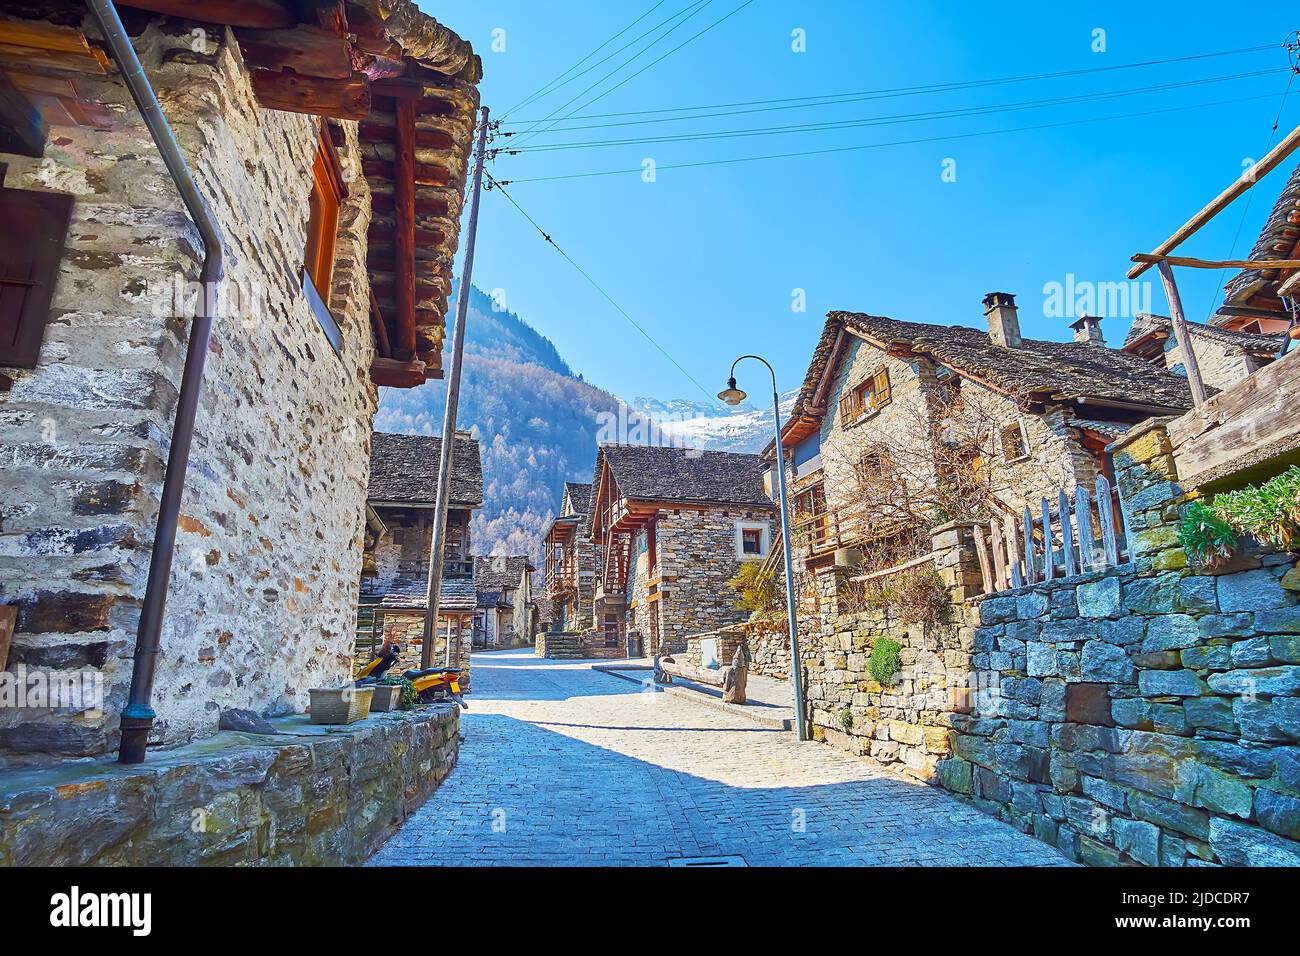 The alley in village with old Alpine stone houses, topped with stone roofs, Sonogno, Valle Verzasca, Switzerland Stock Photo